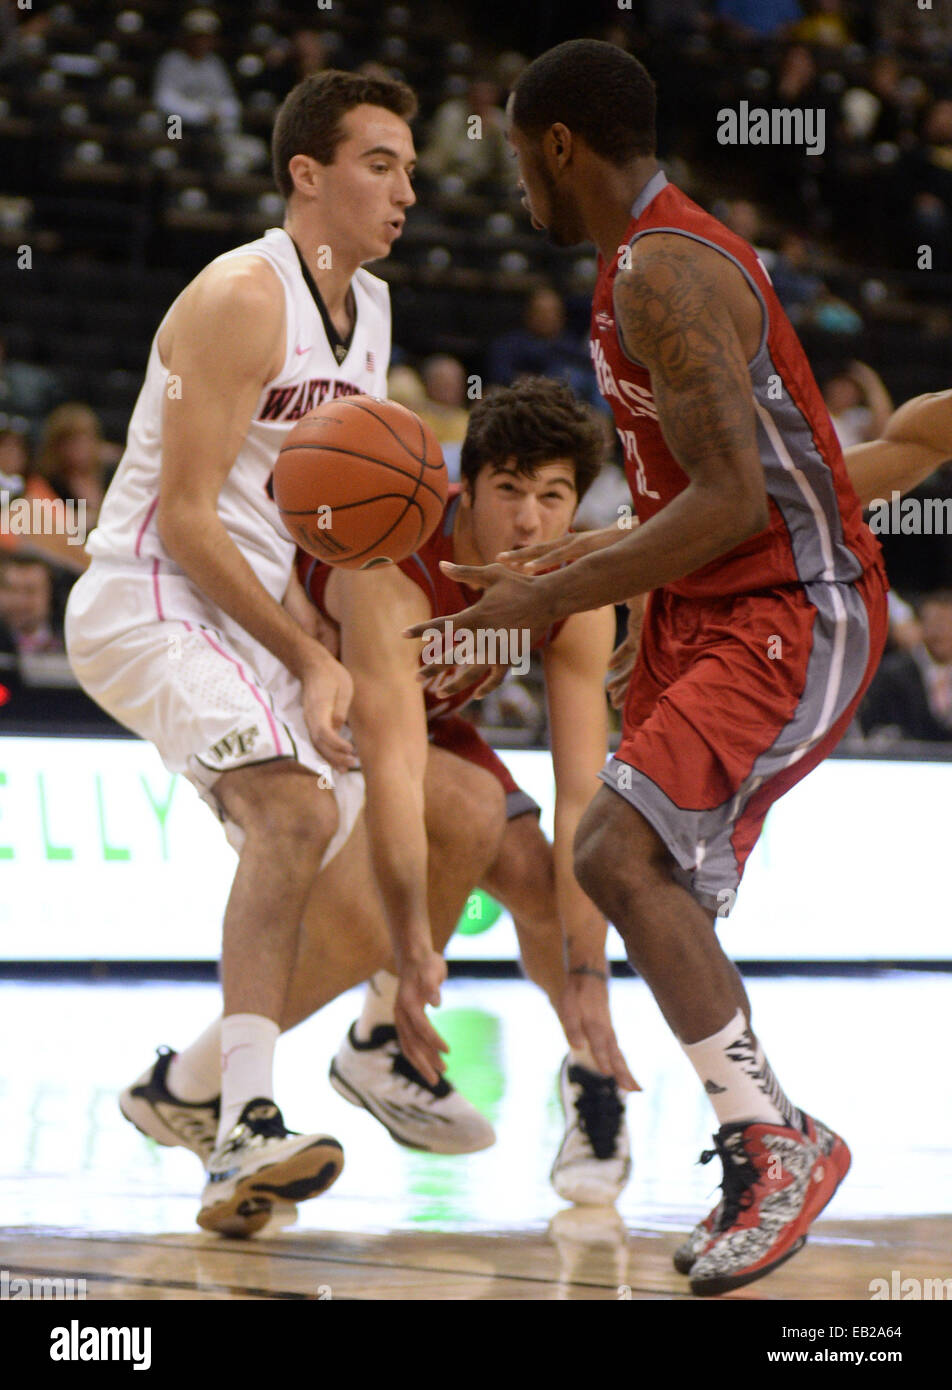 November 24, 2014:Nicholls State Colonels forward Luka Kamber (44) Middle passes the ball to Nicholls State Colonels guard Richie Lewis (12) in the second half at the LJVM Coliseum in Winston-Salem, NC. PJ Ward-Brown/CSM Stock Photo